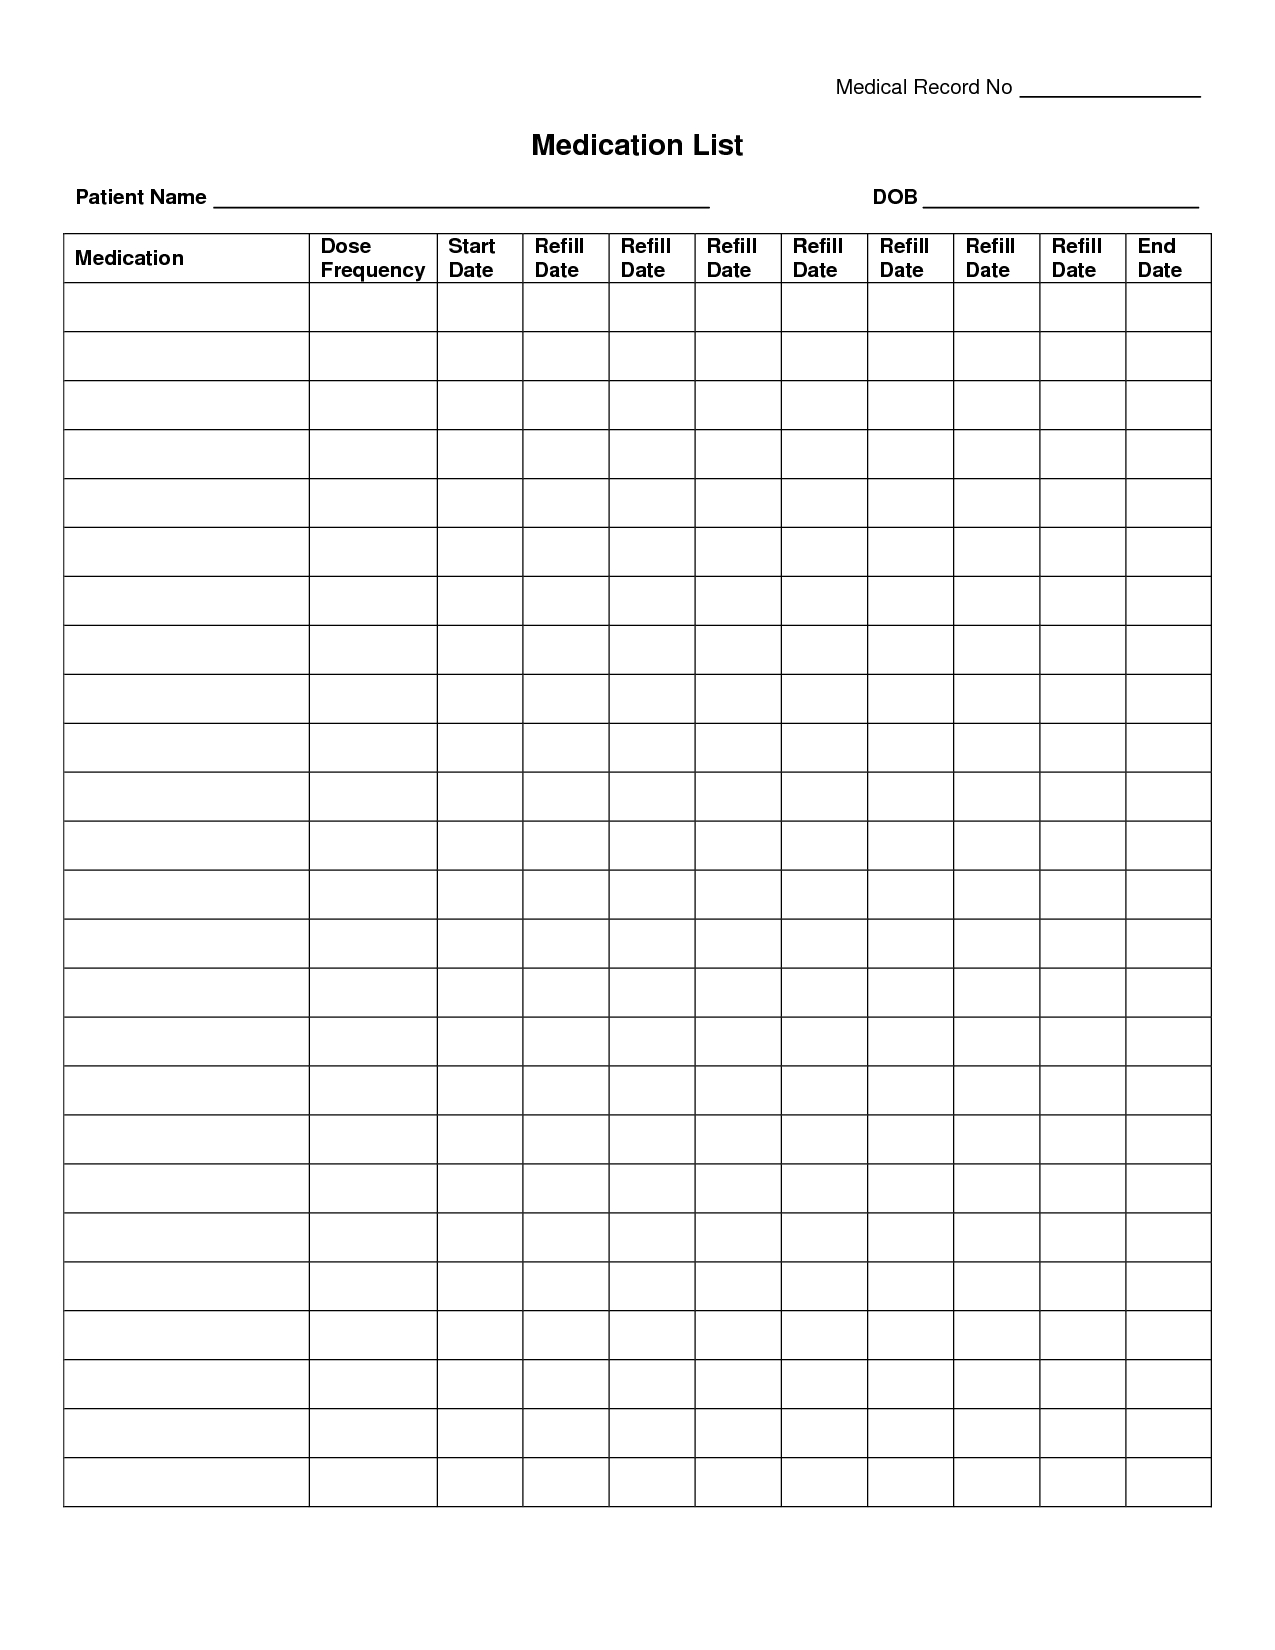 Free Medication Administration Record Template Excel - Yahoo Image - Free Printable Wallet Medication List Template